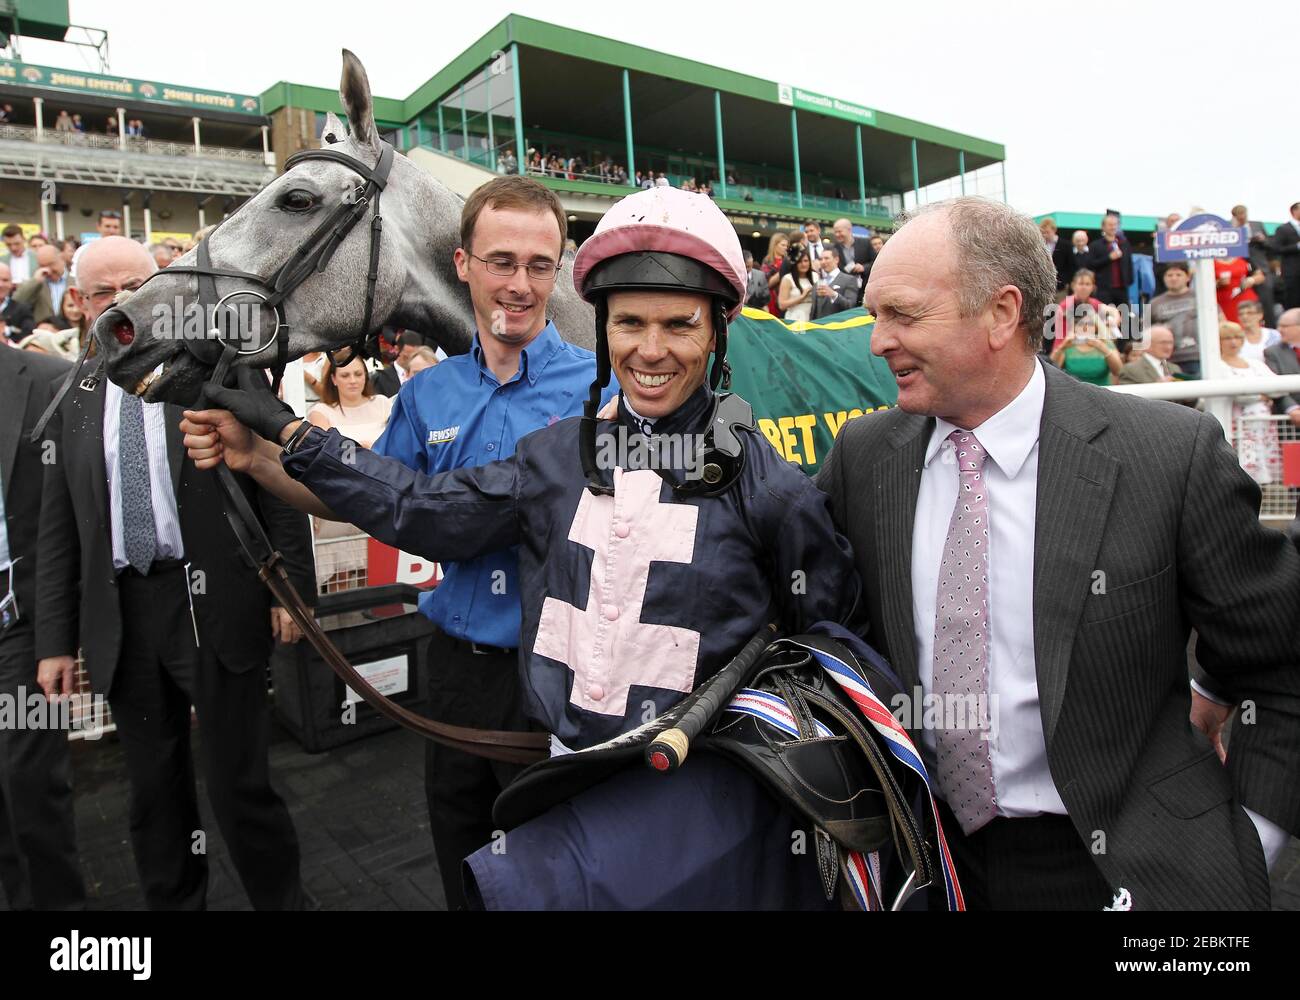 Horse Racing - Northumberland Plate - Newcastle Racecourse - 29/6/13  Trainer Jonjo O'Neill (R) and jockey Graham Lee after winning the 15.15 The John Smiths Northumberland Plate with Tominator  Mandatory Credit: Action Images / Ed Sykes  Livepic Stock Photo